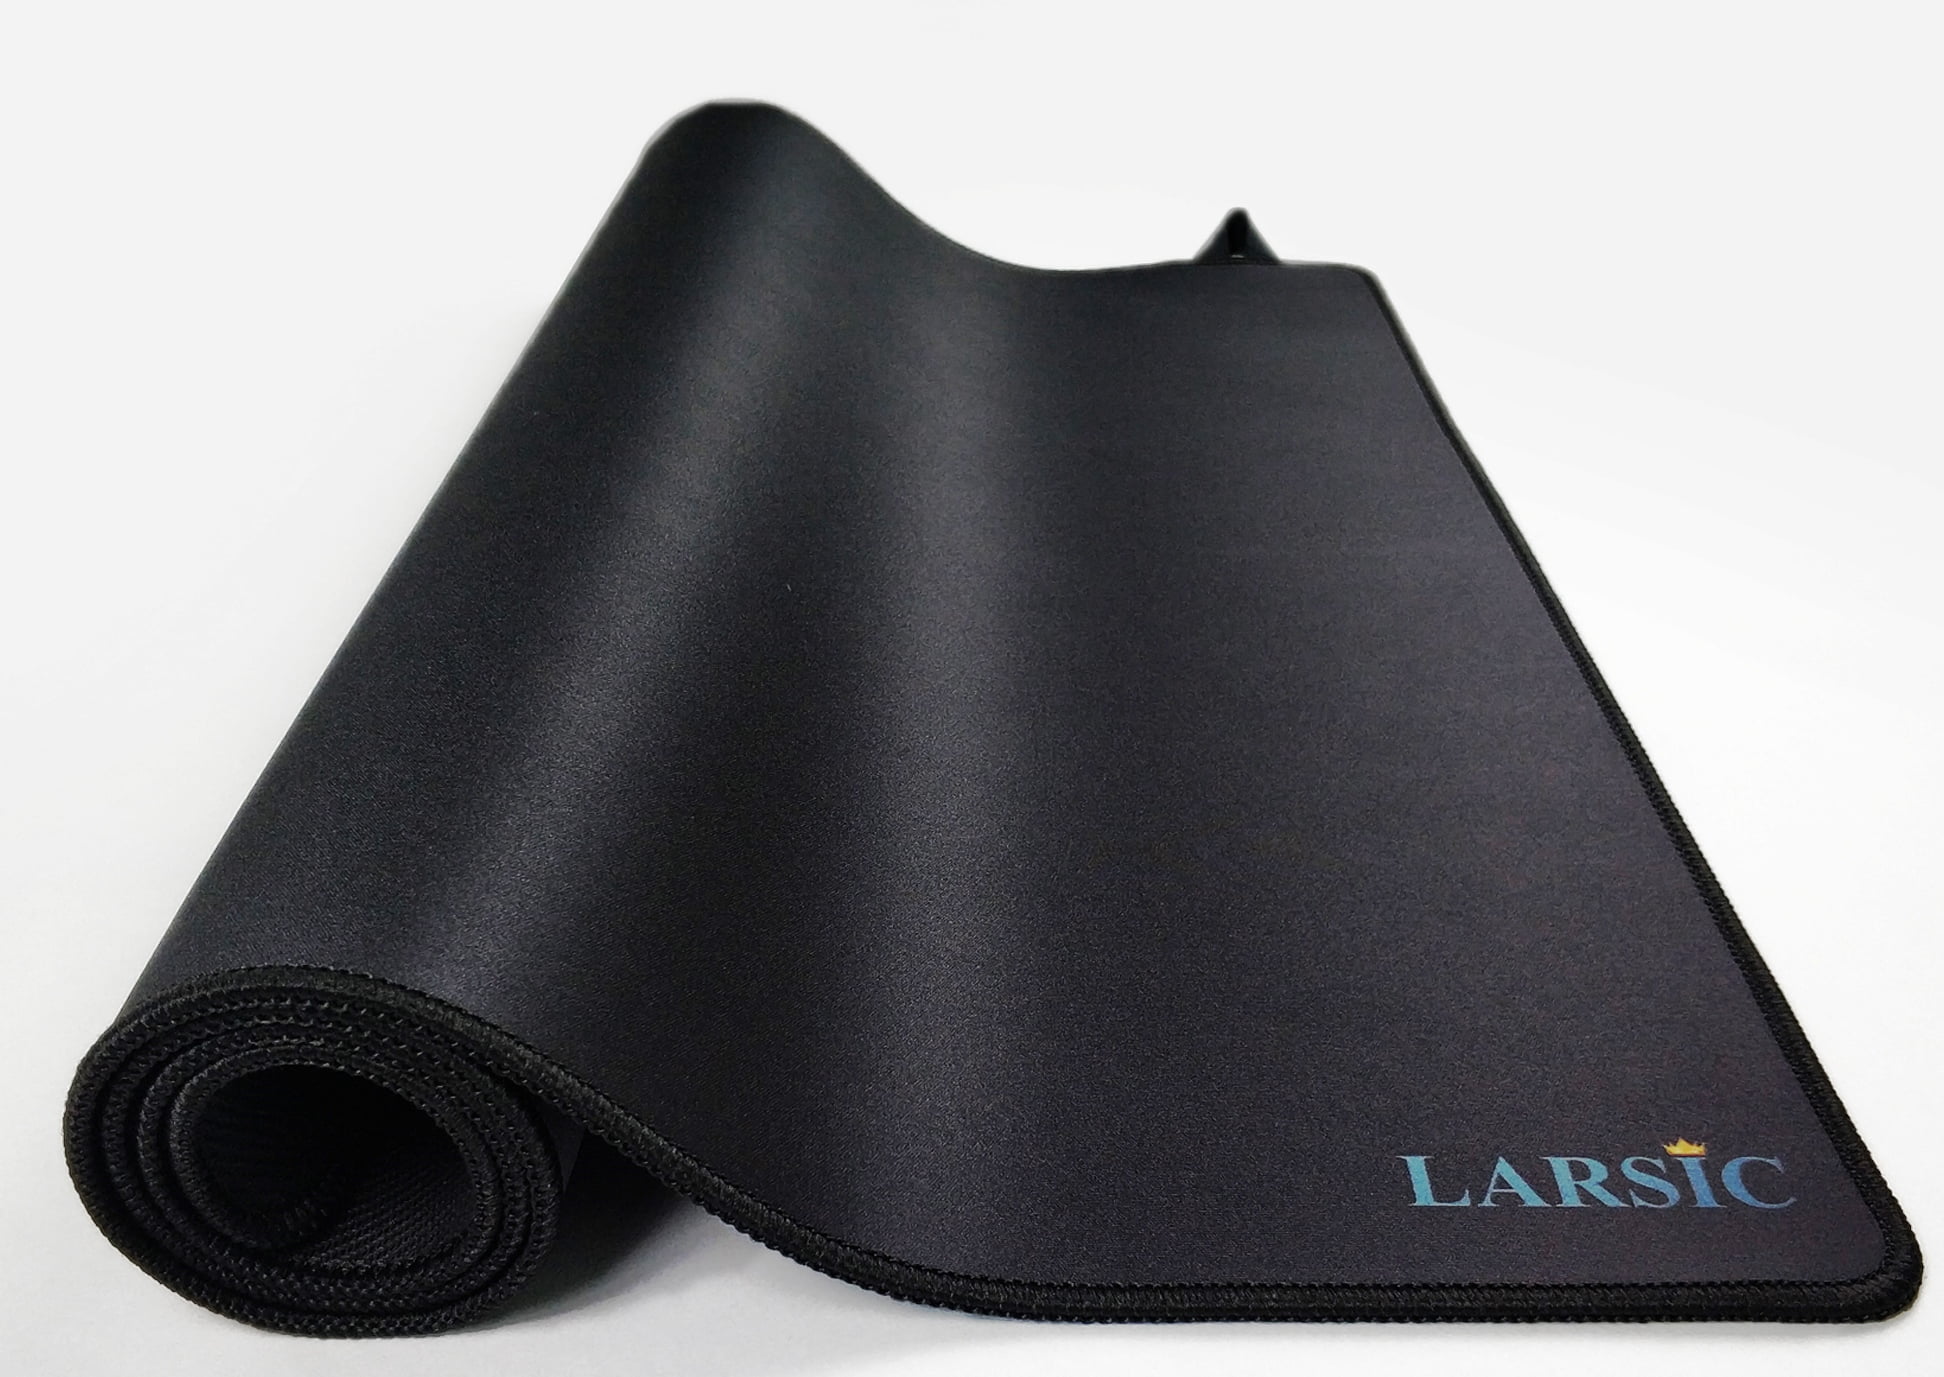 Larsic Stove Cover - Thick Natural Rubber Sheet Protects Electric Stove  Top. Anti-Slip Coating, Waterproof, Heat Resistant, Foldable. Prevents  Scratching, Expands Usable Space (32X21, Black)